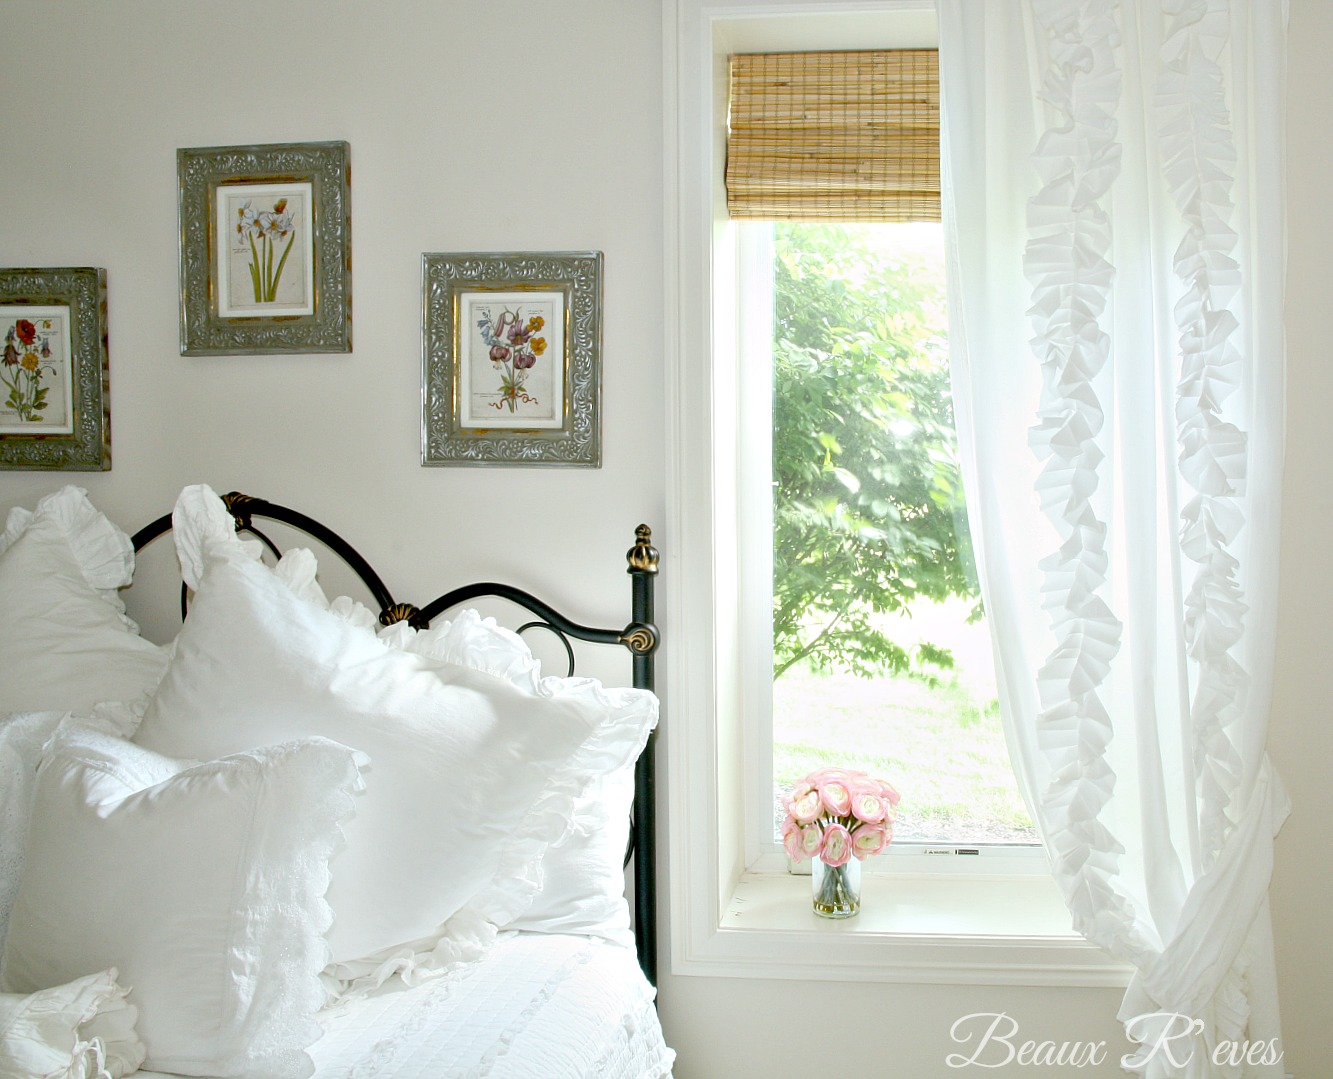 From My Front Porch To Yours- How I Found My Style Sundays- Beaux R'eves